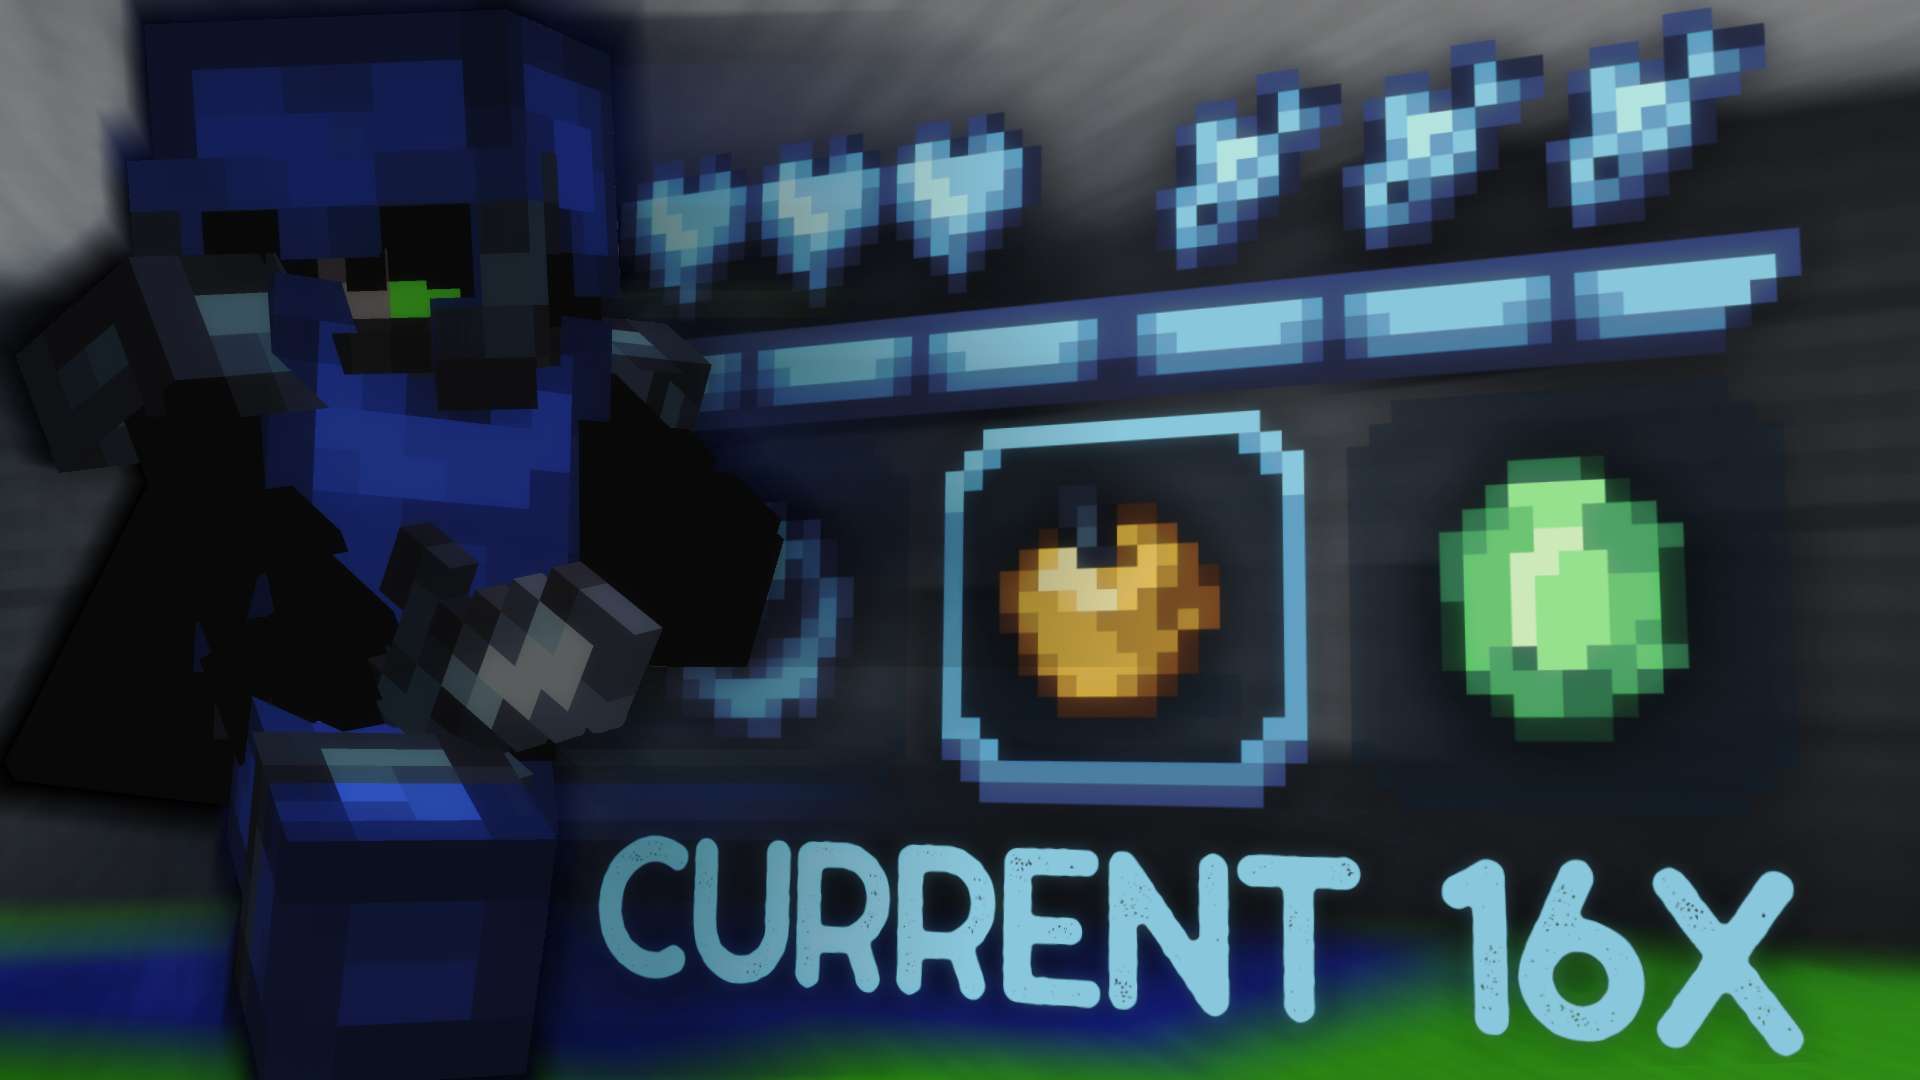 CURRENT [LONG] 16x by didms on PvPRP